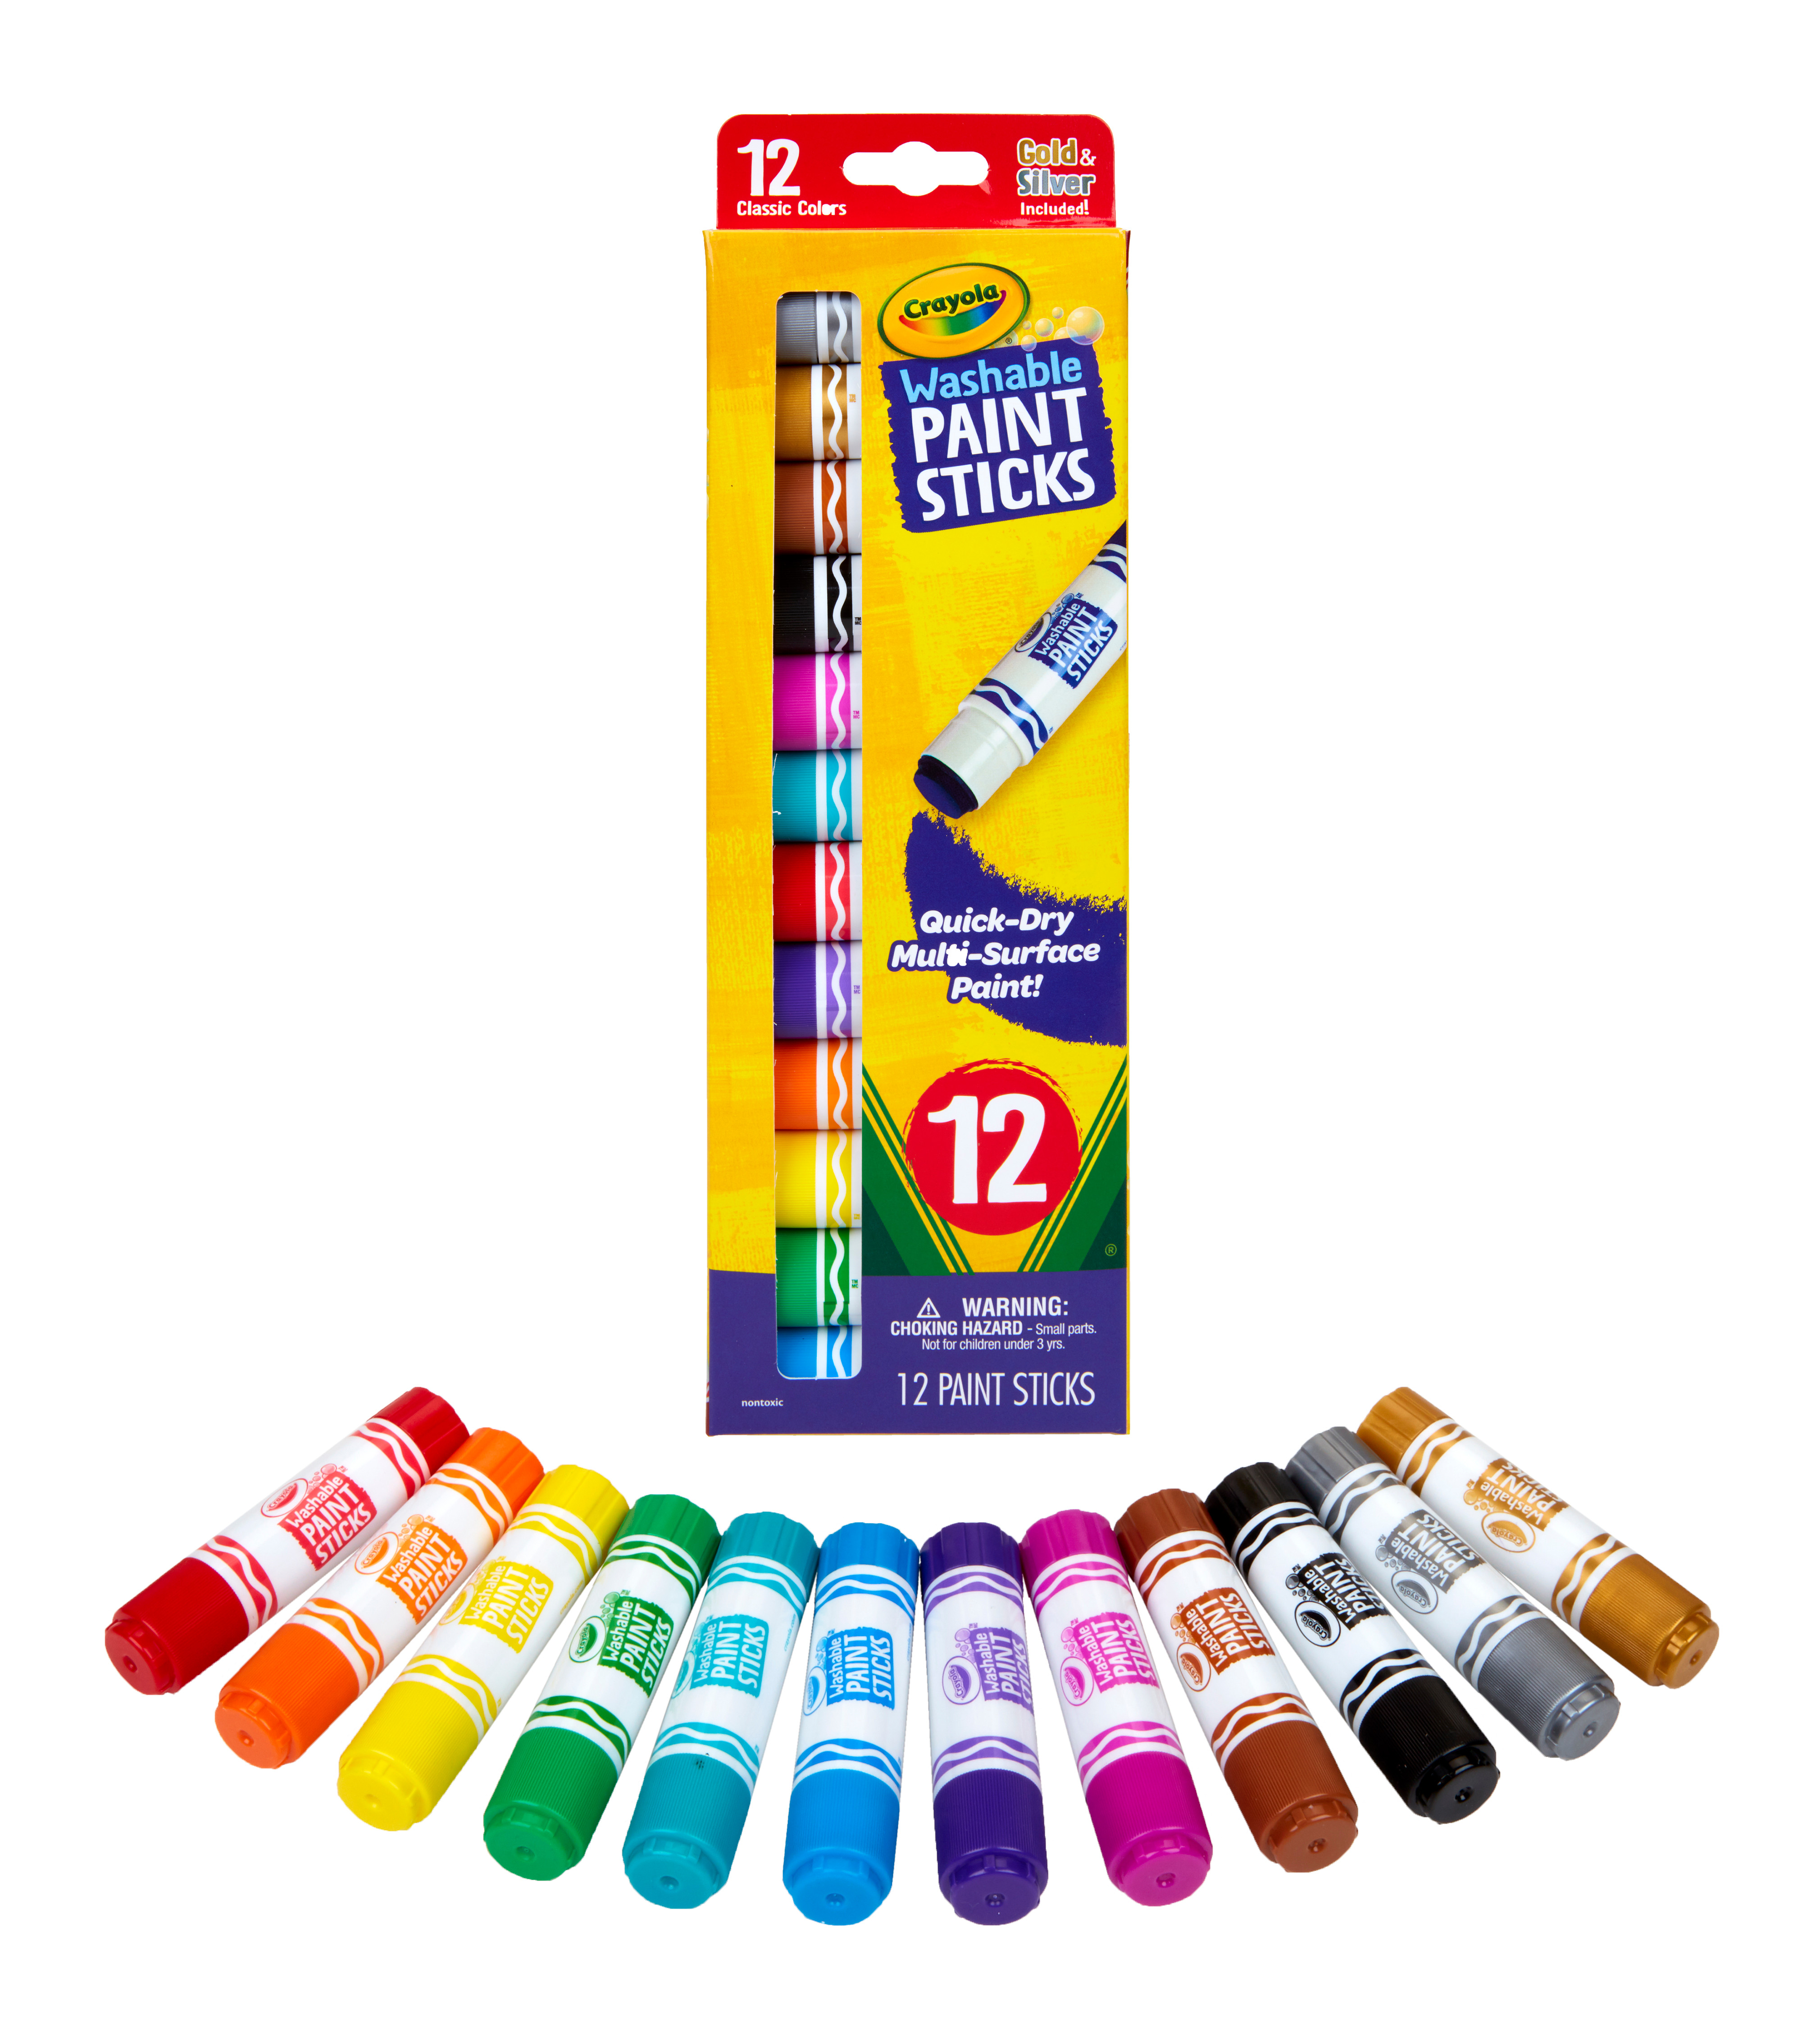 Crayola Quick Dry Paint Sticks, Assorted Colors, Washable Paint Set for Kids, 12 Count - image 1 of 8